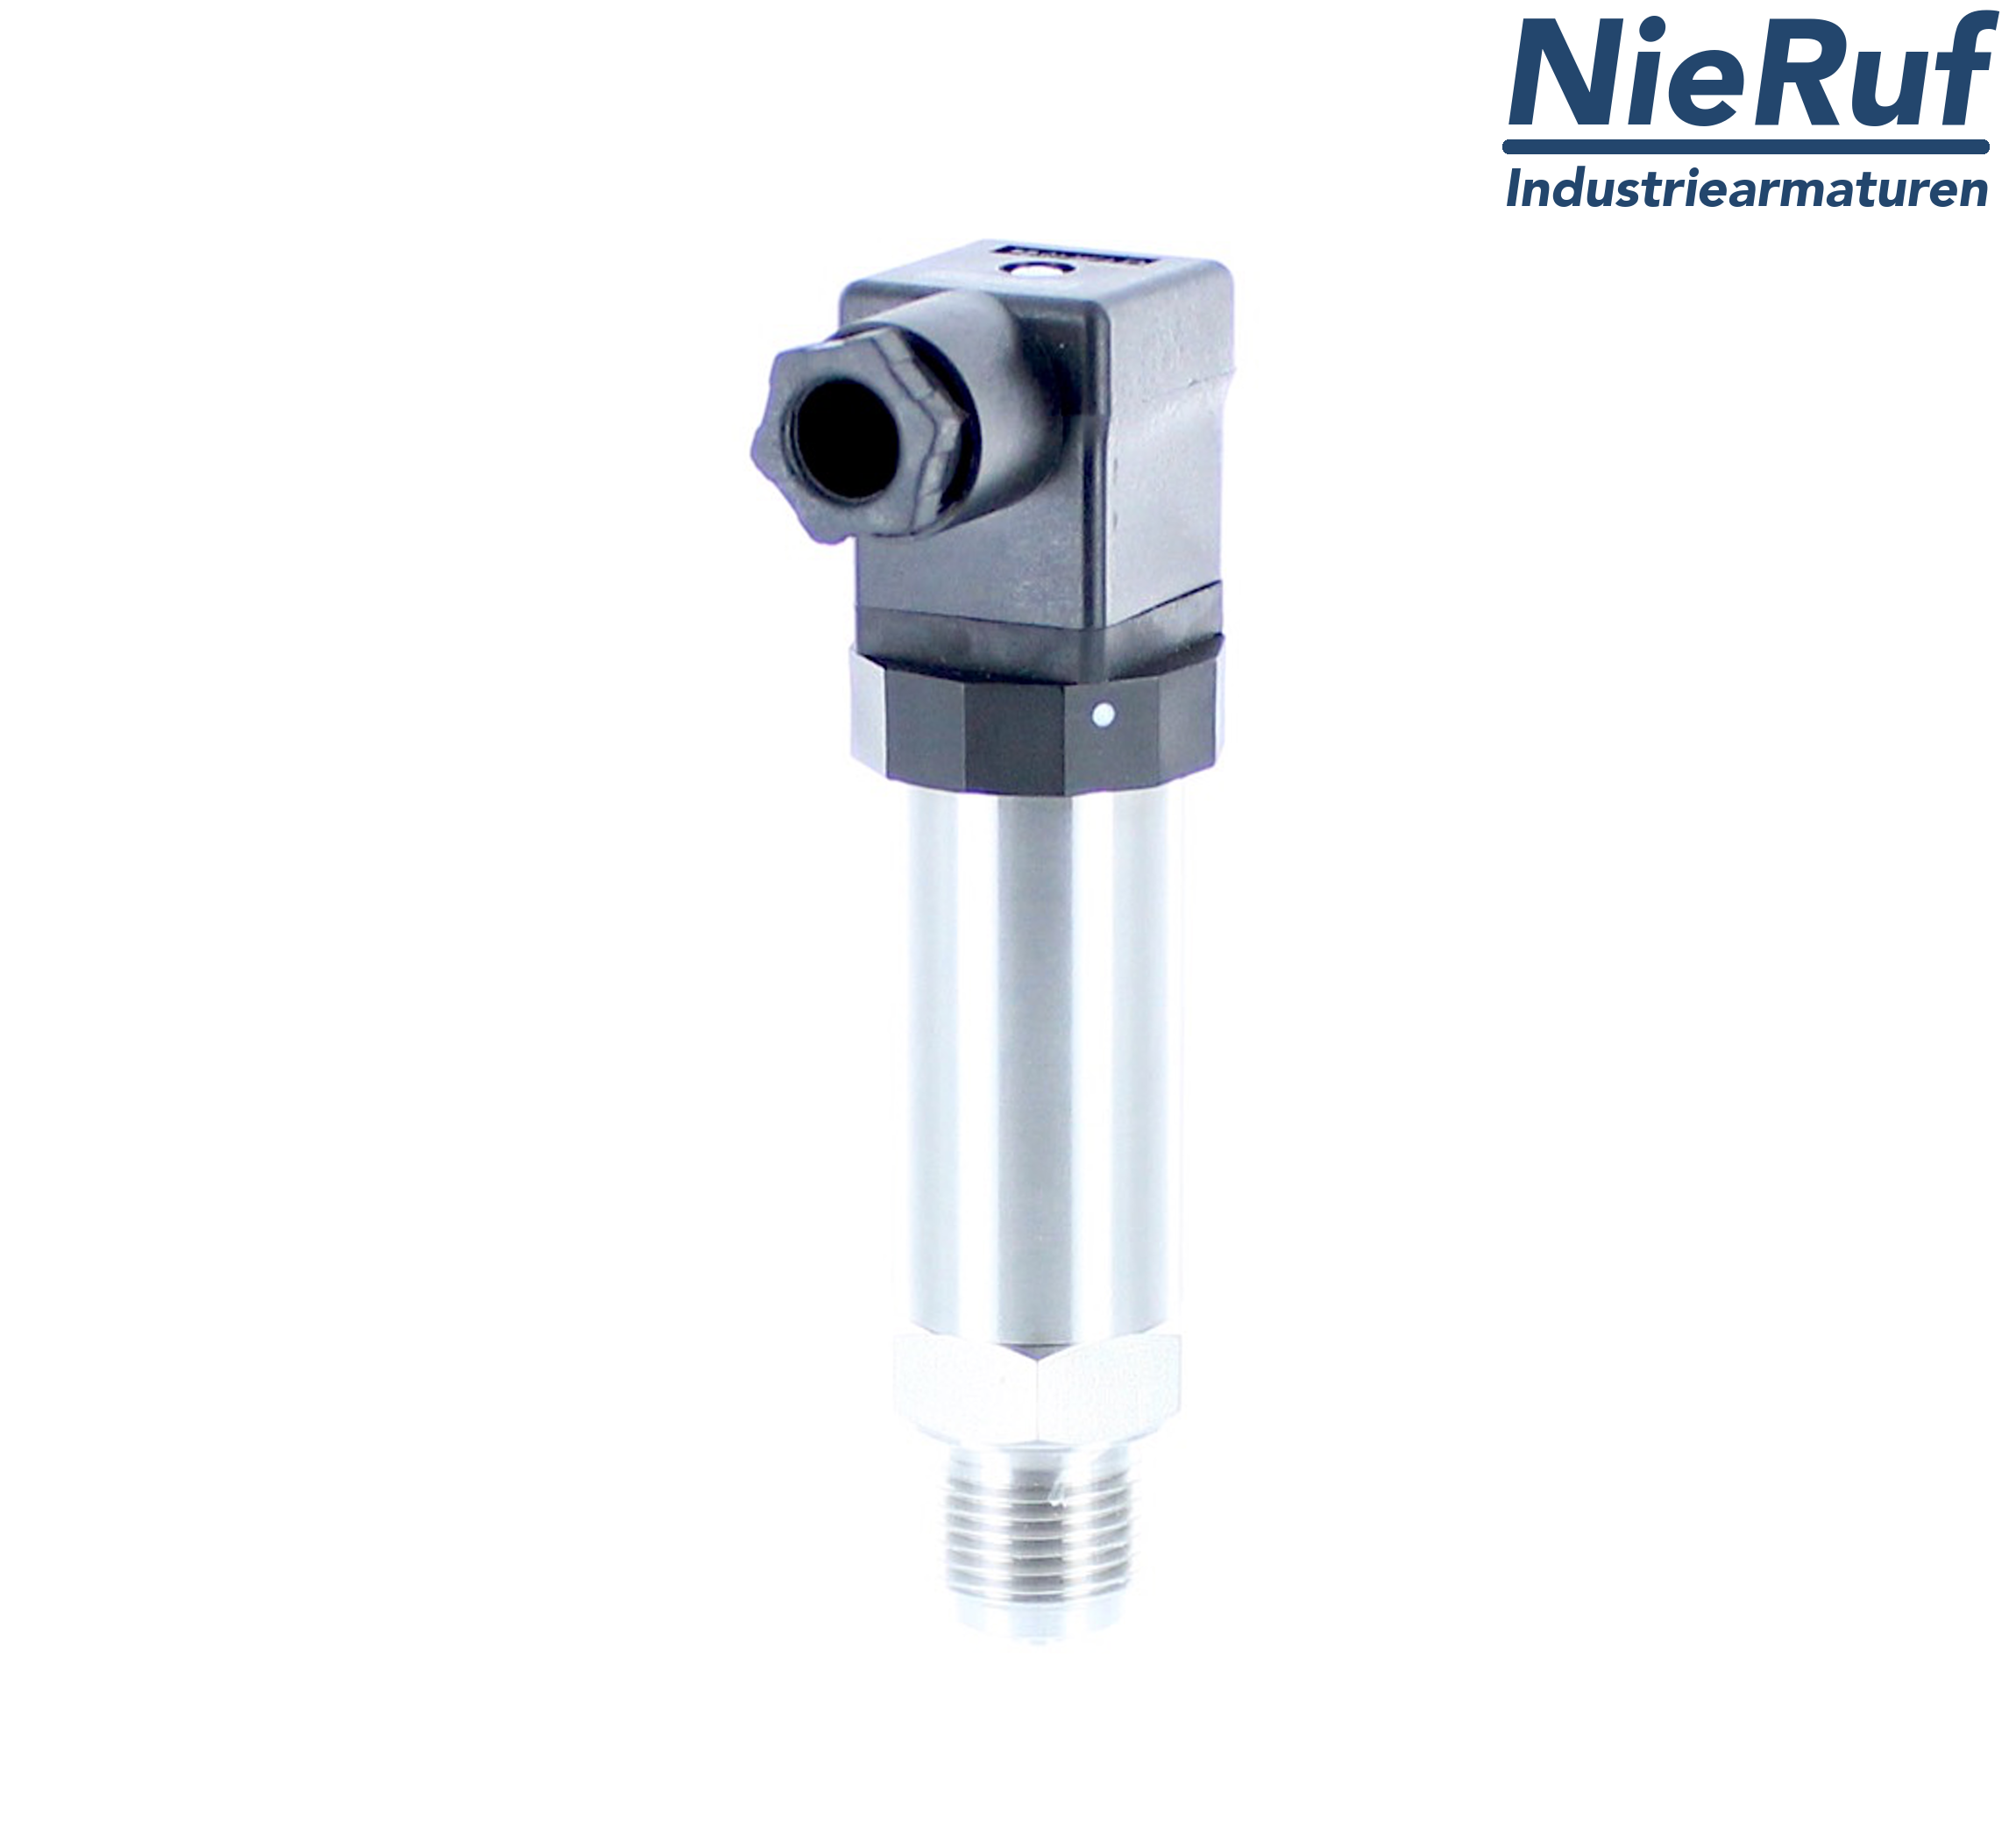 pressure sensor G 1/4" B DS01 stainless steel 2-wire: 4-20mA FPM 0,0 - 16,0 bar